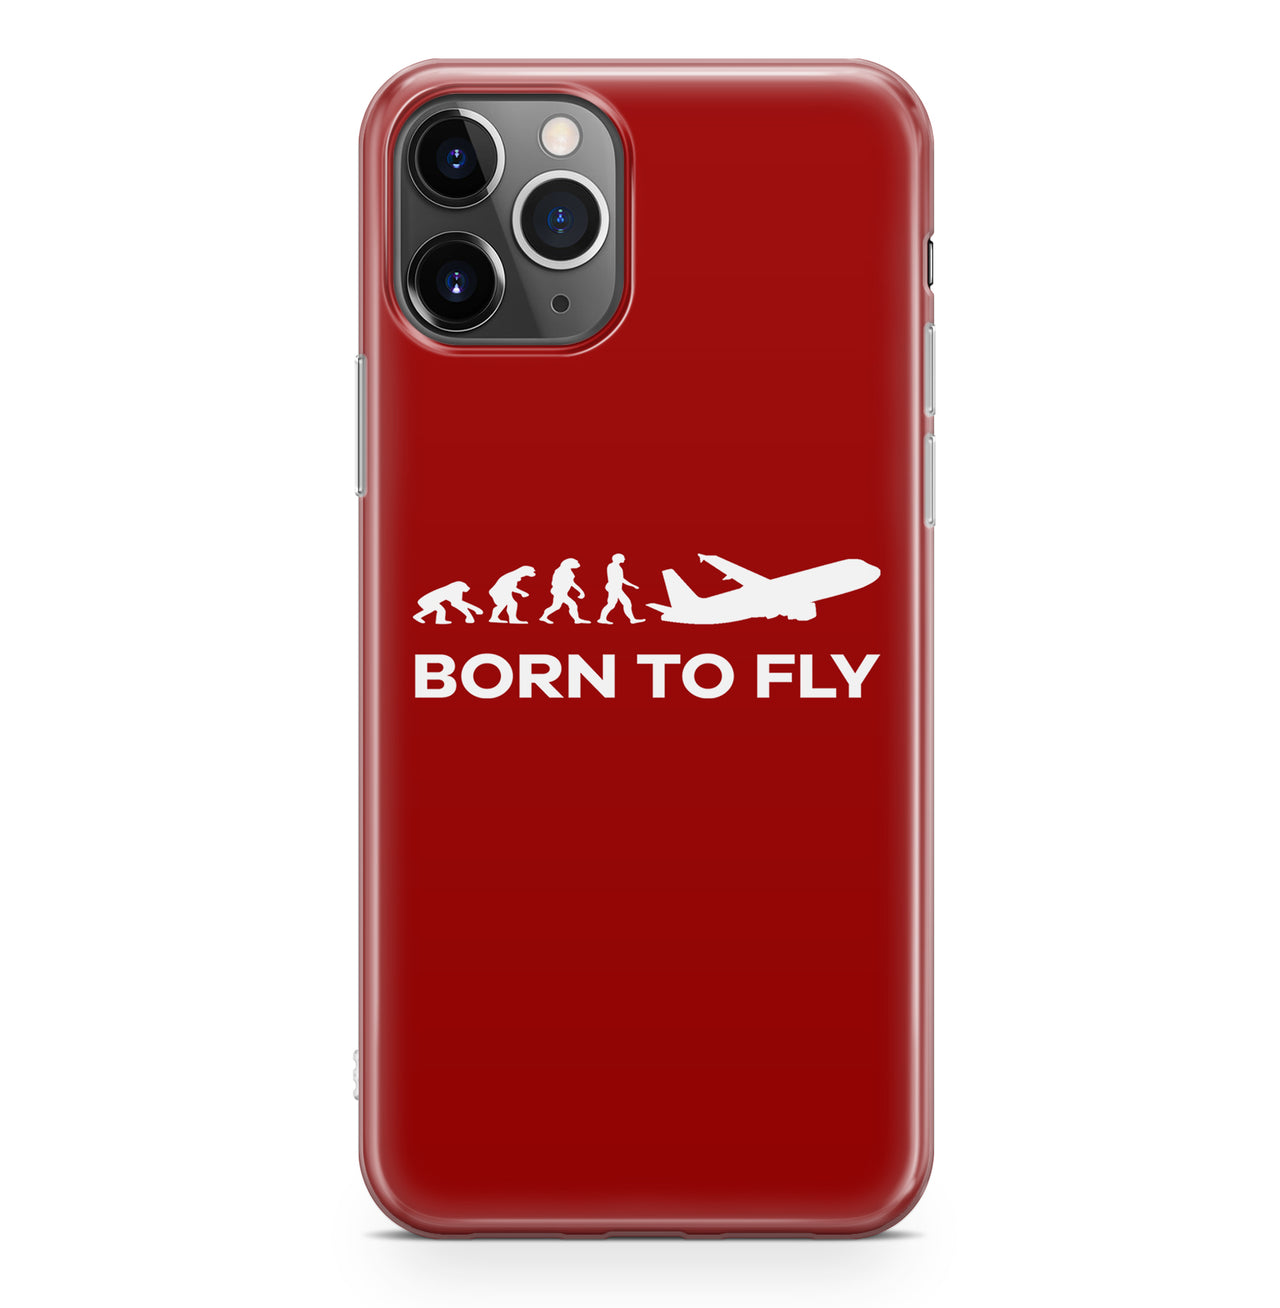 Born To Fly Designed iPhone Cases